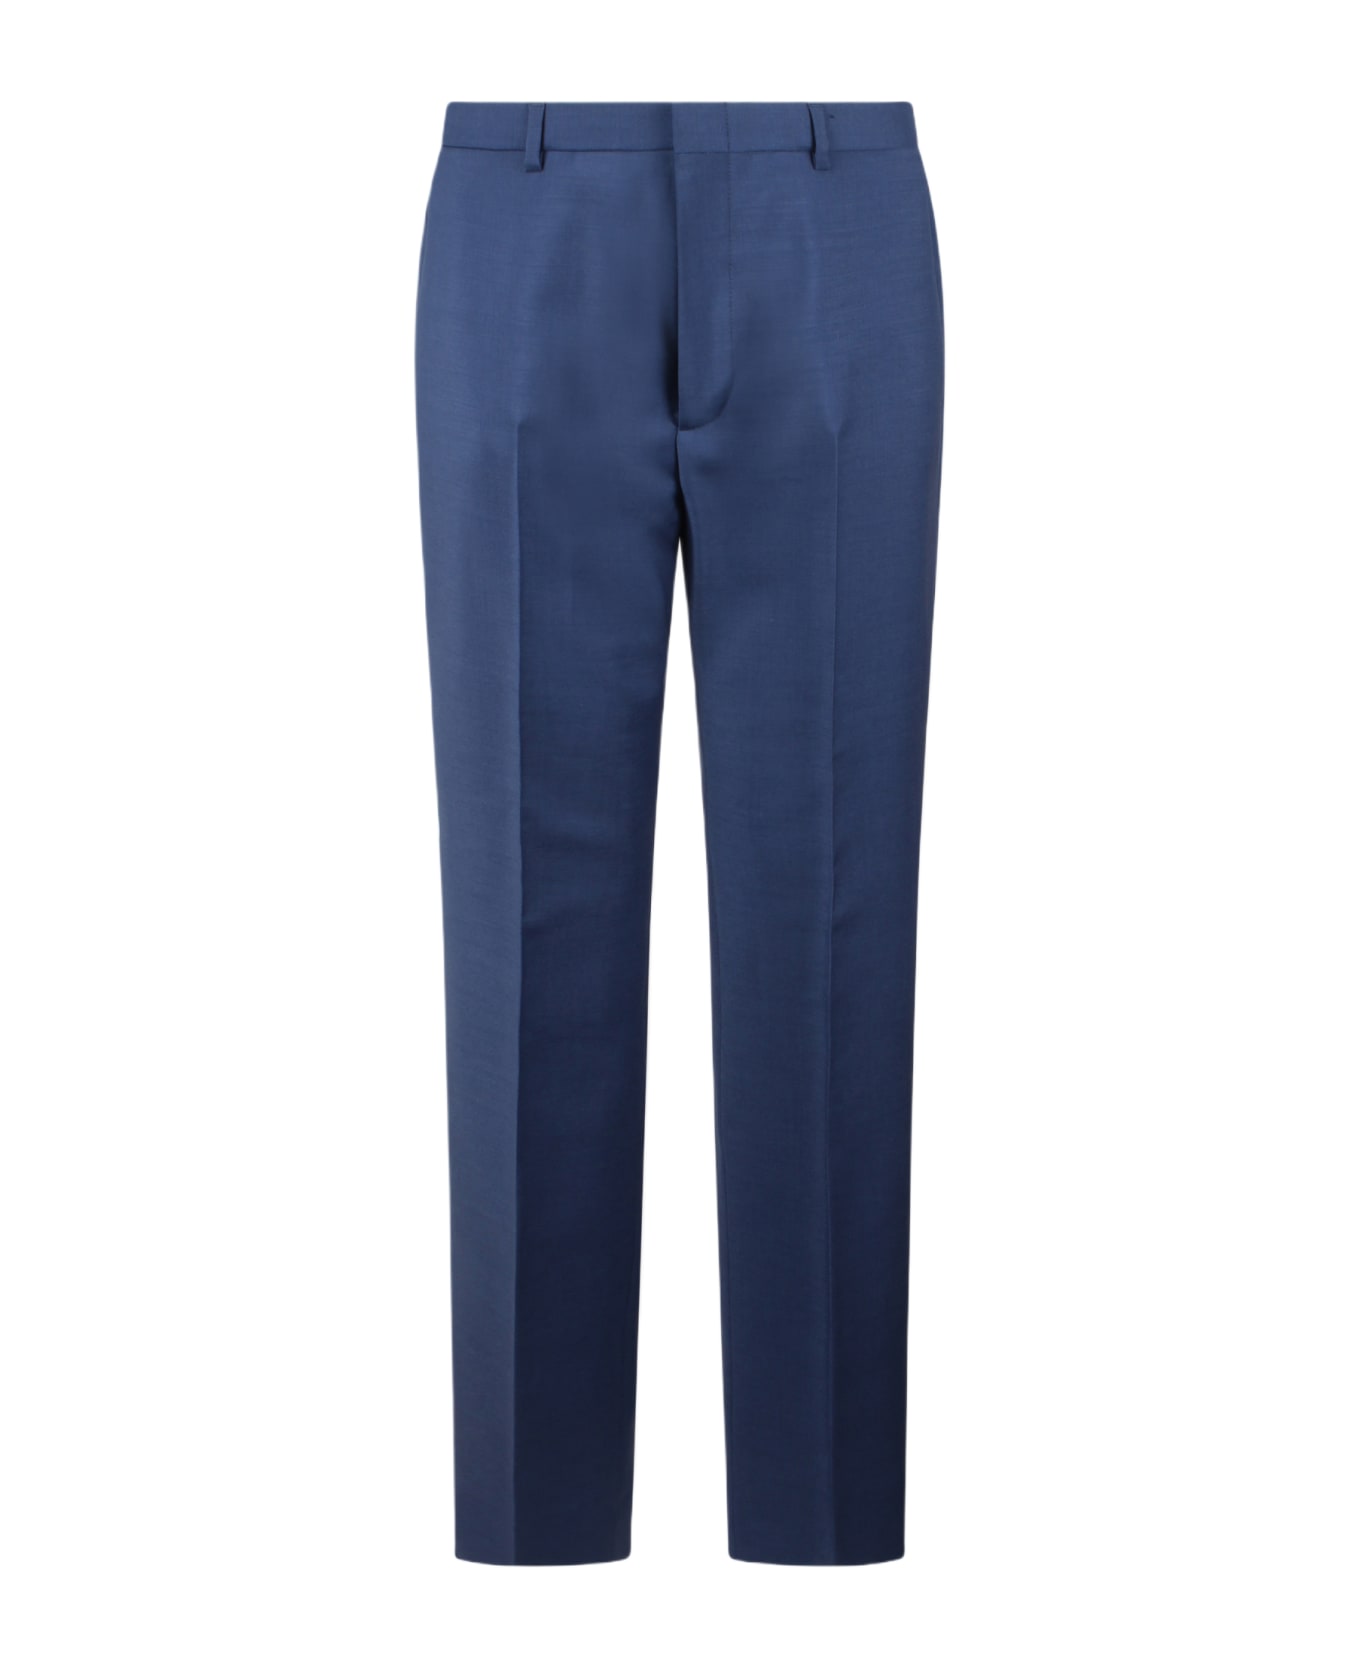 Gucci Wool Mohair Trousers - Blue ボトムス